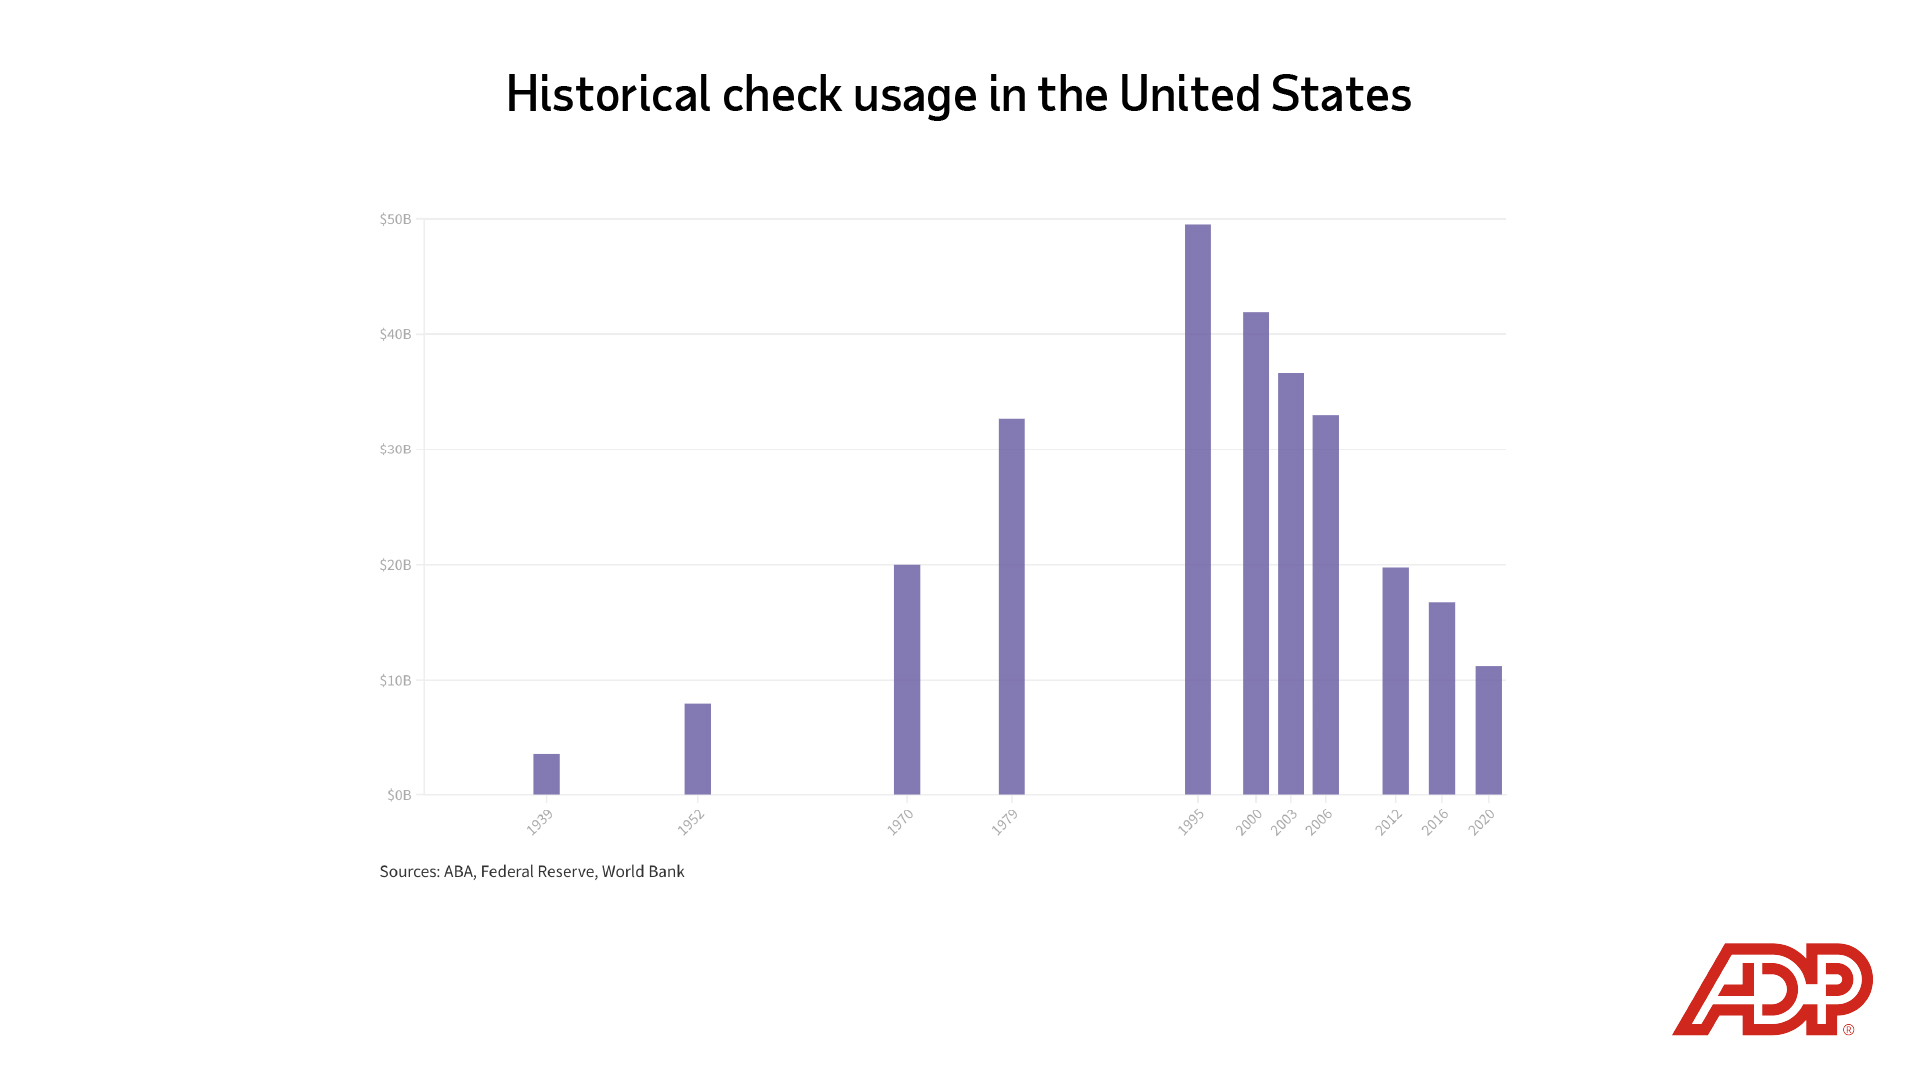 Image description: Bar chart depicting historical check usage in the United States between 1939 and 2020. End of alt text.